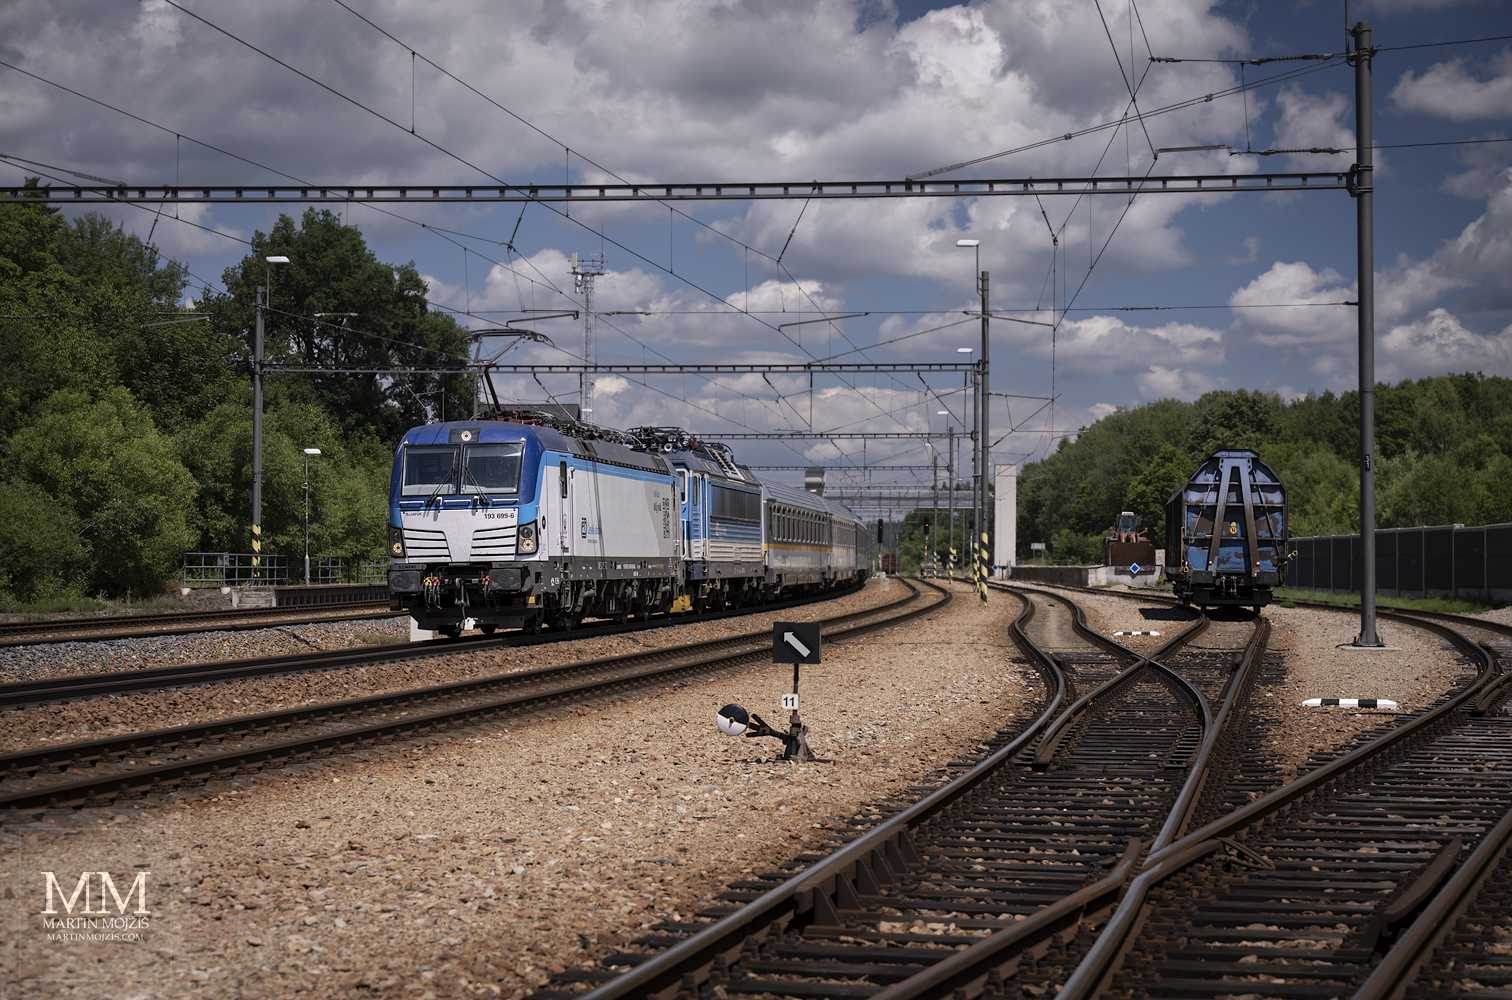 The locomotive Siemens Vectron 193 699-6 carries the Western Express with a locomotive in the direction Pilsen.